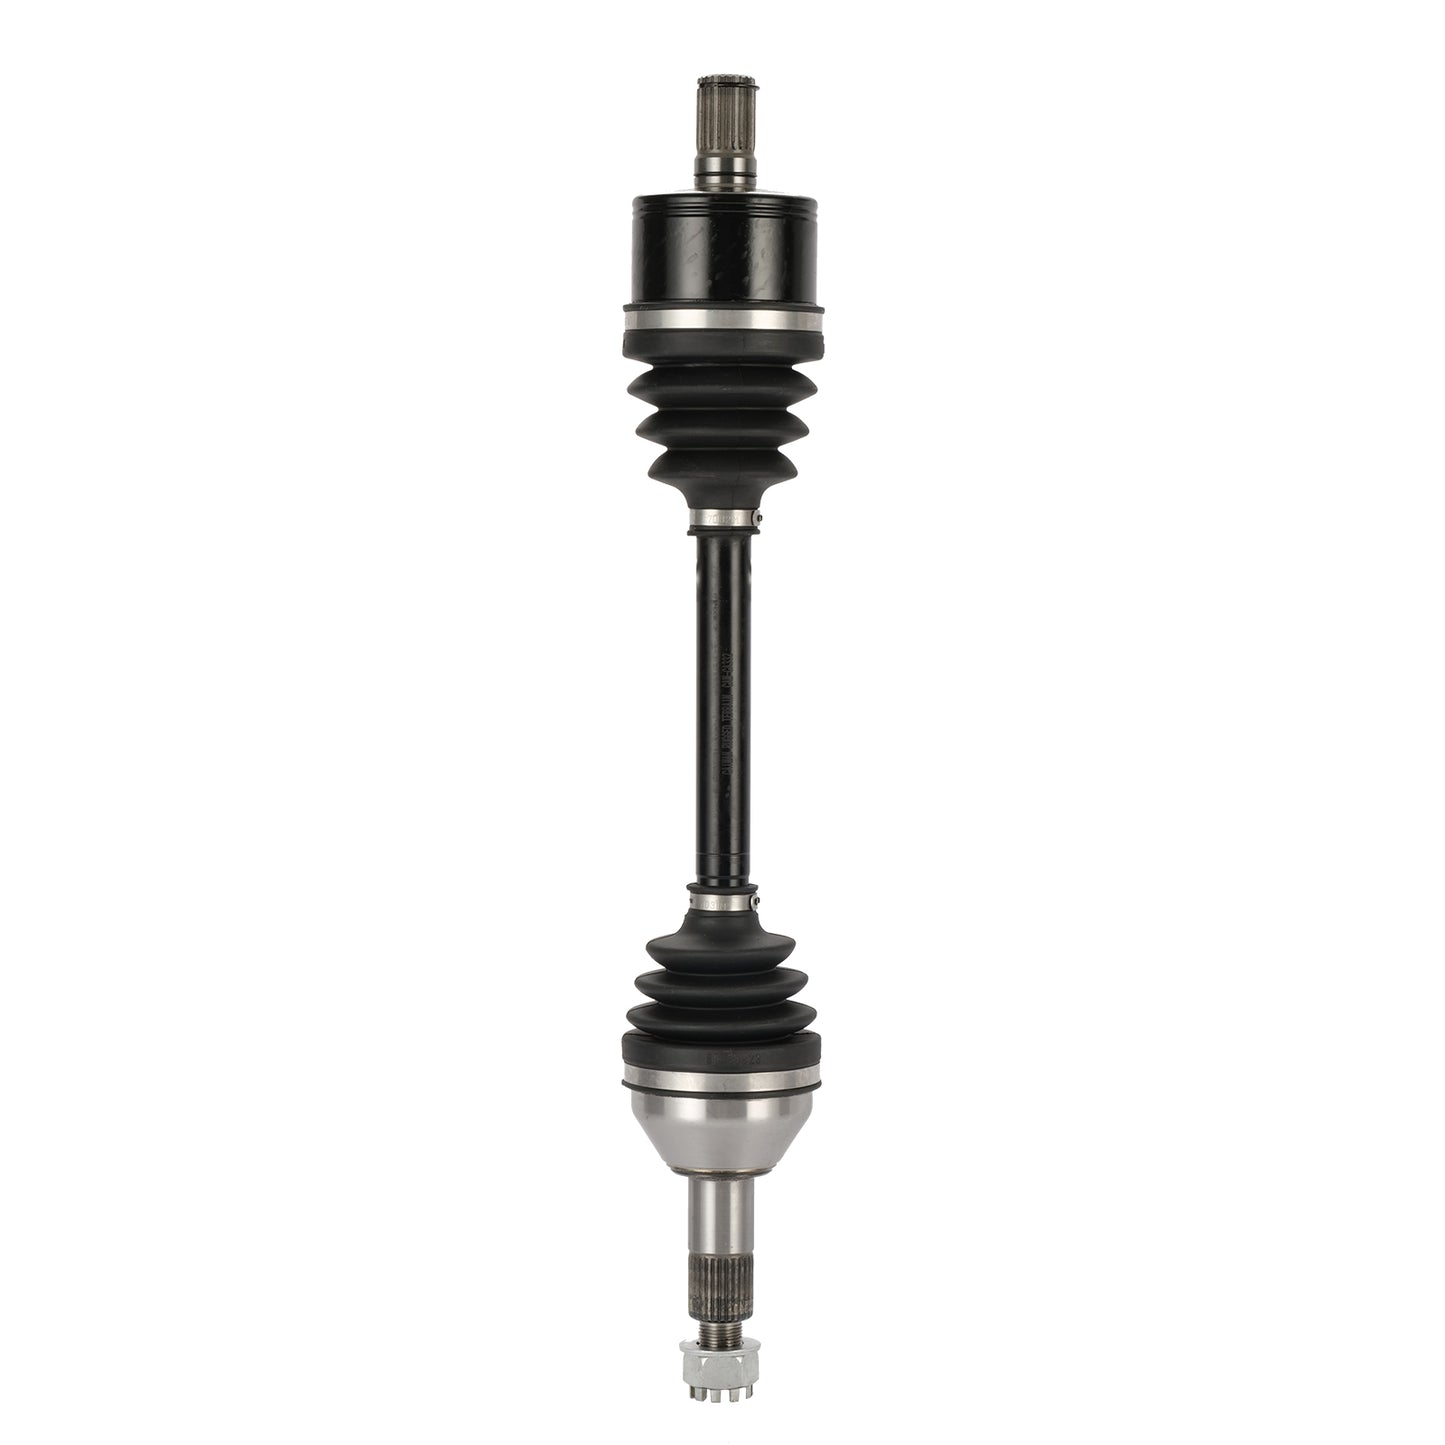 2 CAM-CA332 Rear Left Drive Shaft CV Axle Compatible with CAN AM (2019-2021) Maverick Trail 800, 1000 BR 705502541